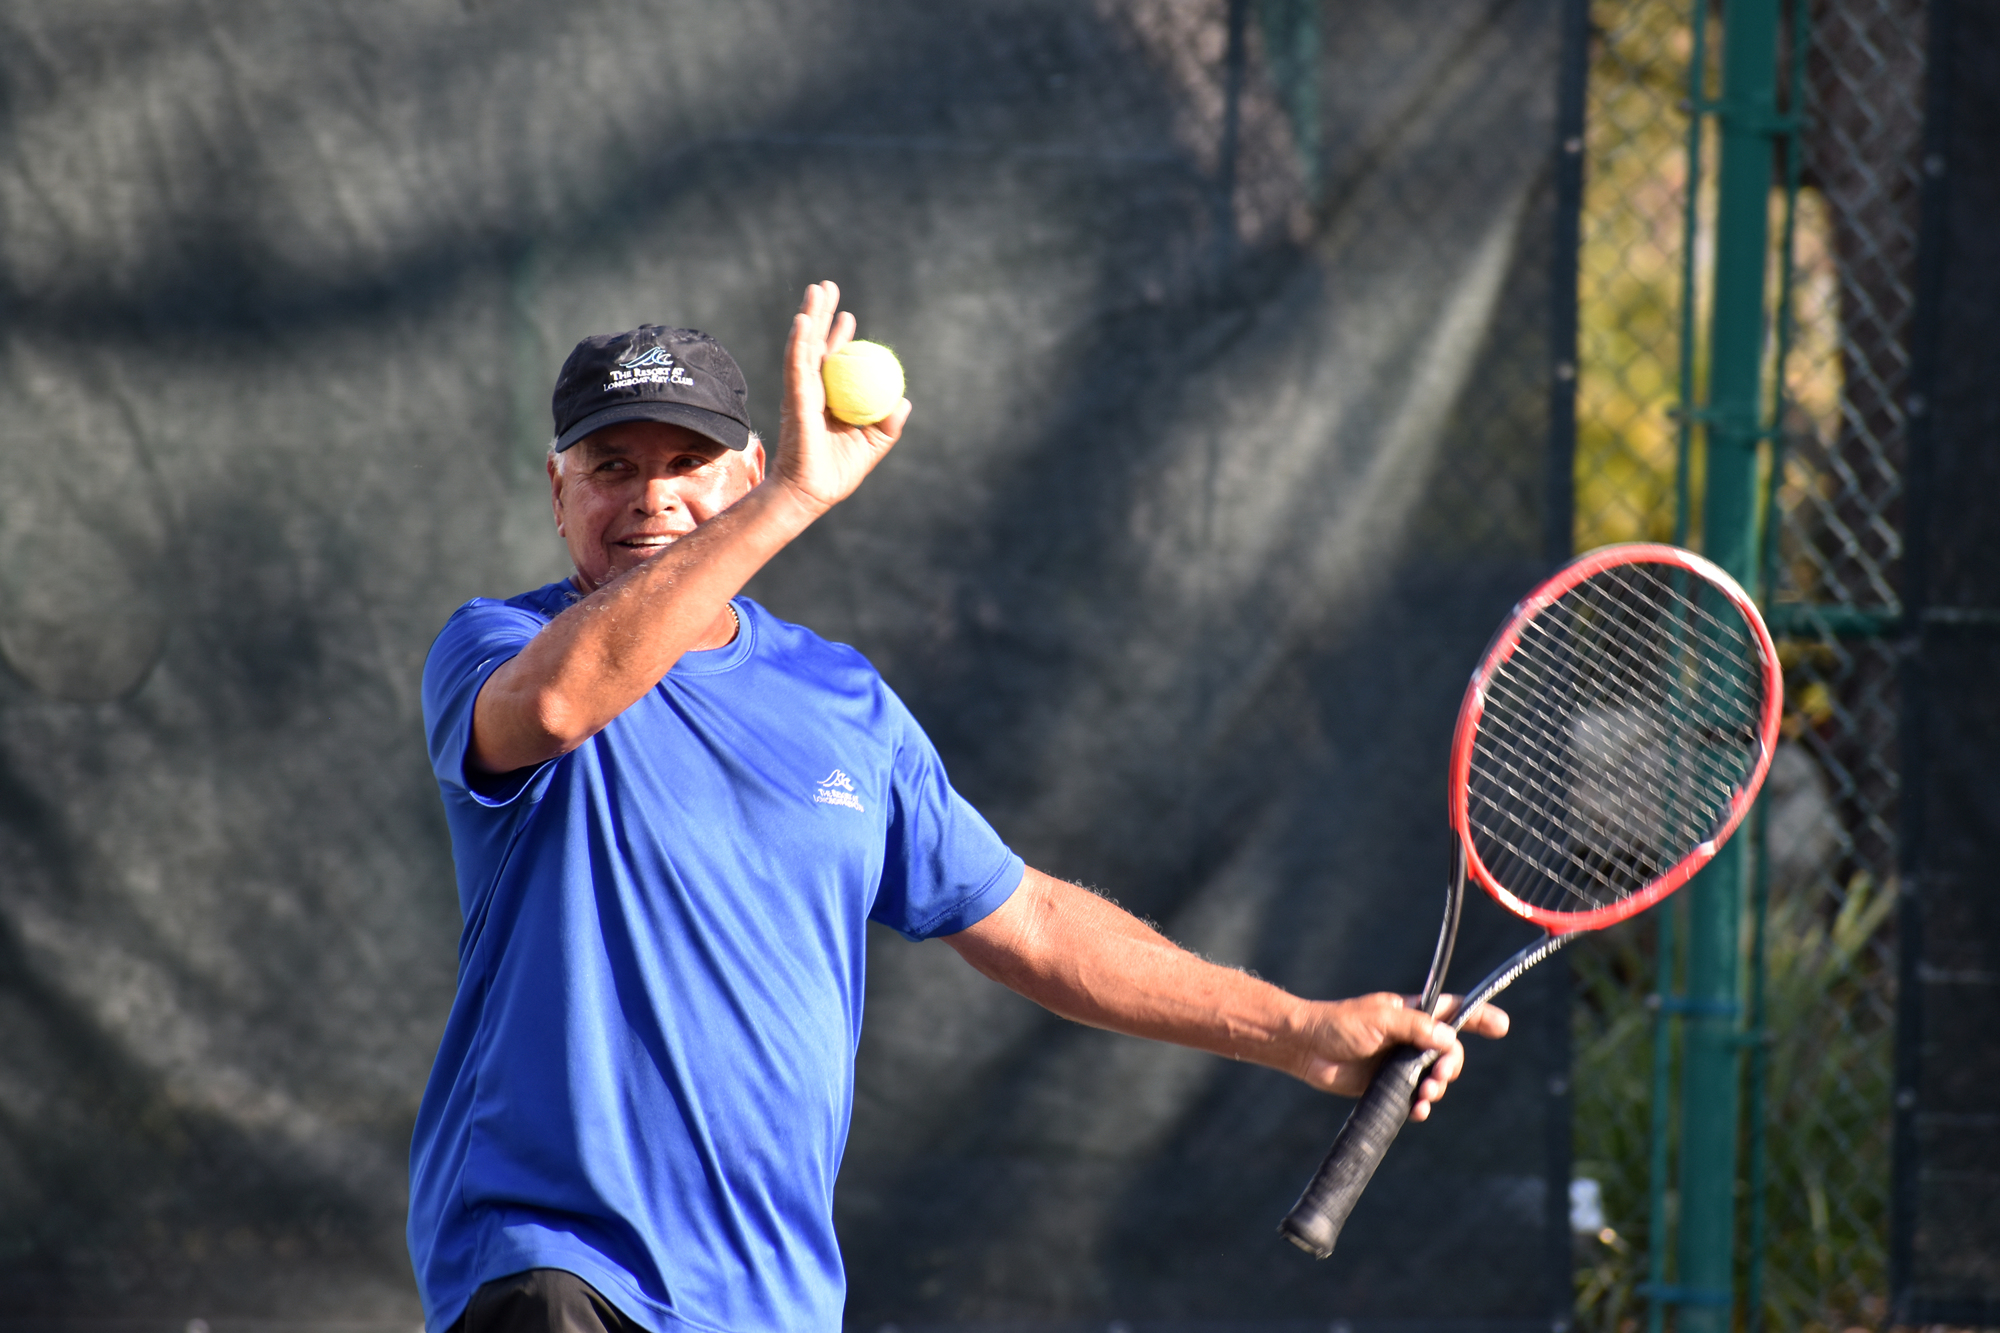 Sammy Aviles was a tennis pro at the Colony. He is now a tennis pro at the Longboat Key Club. Photo by Katie Johns